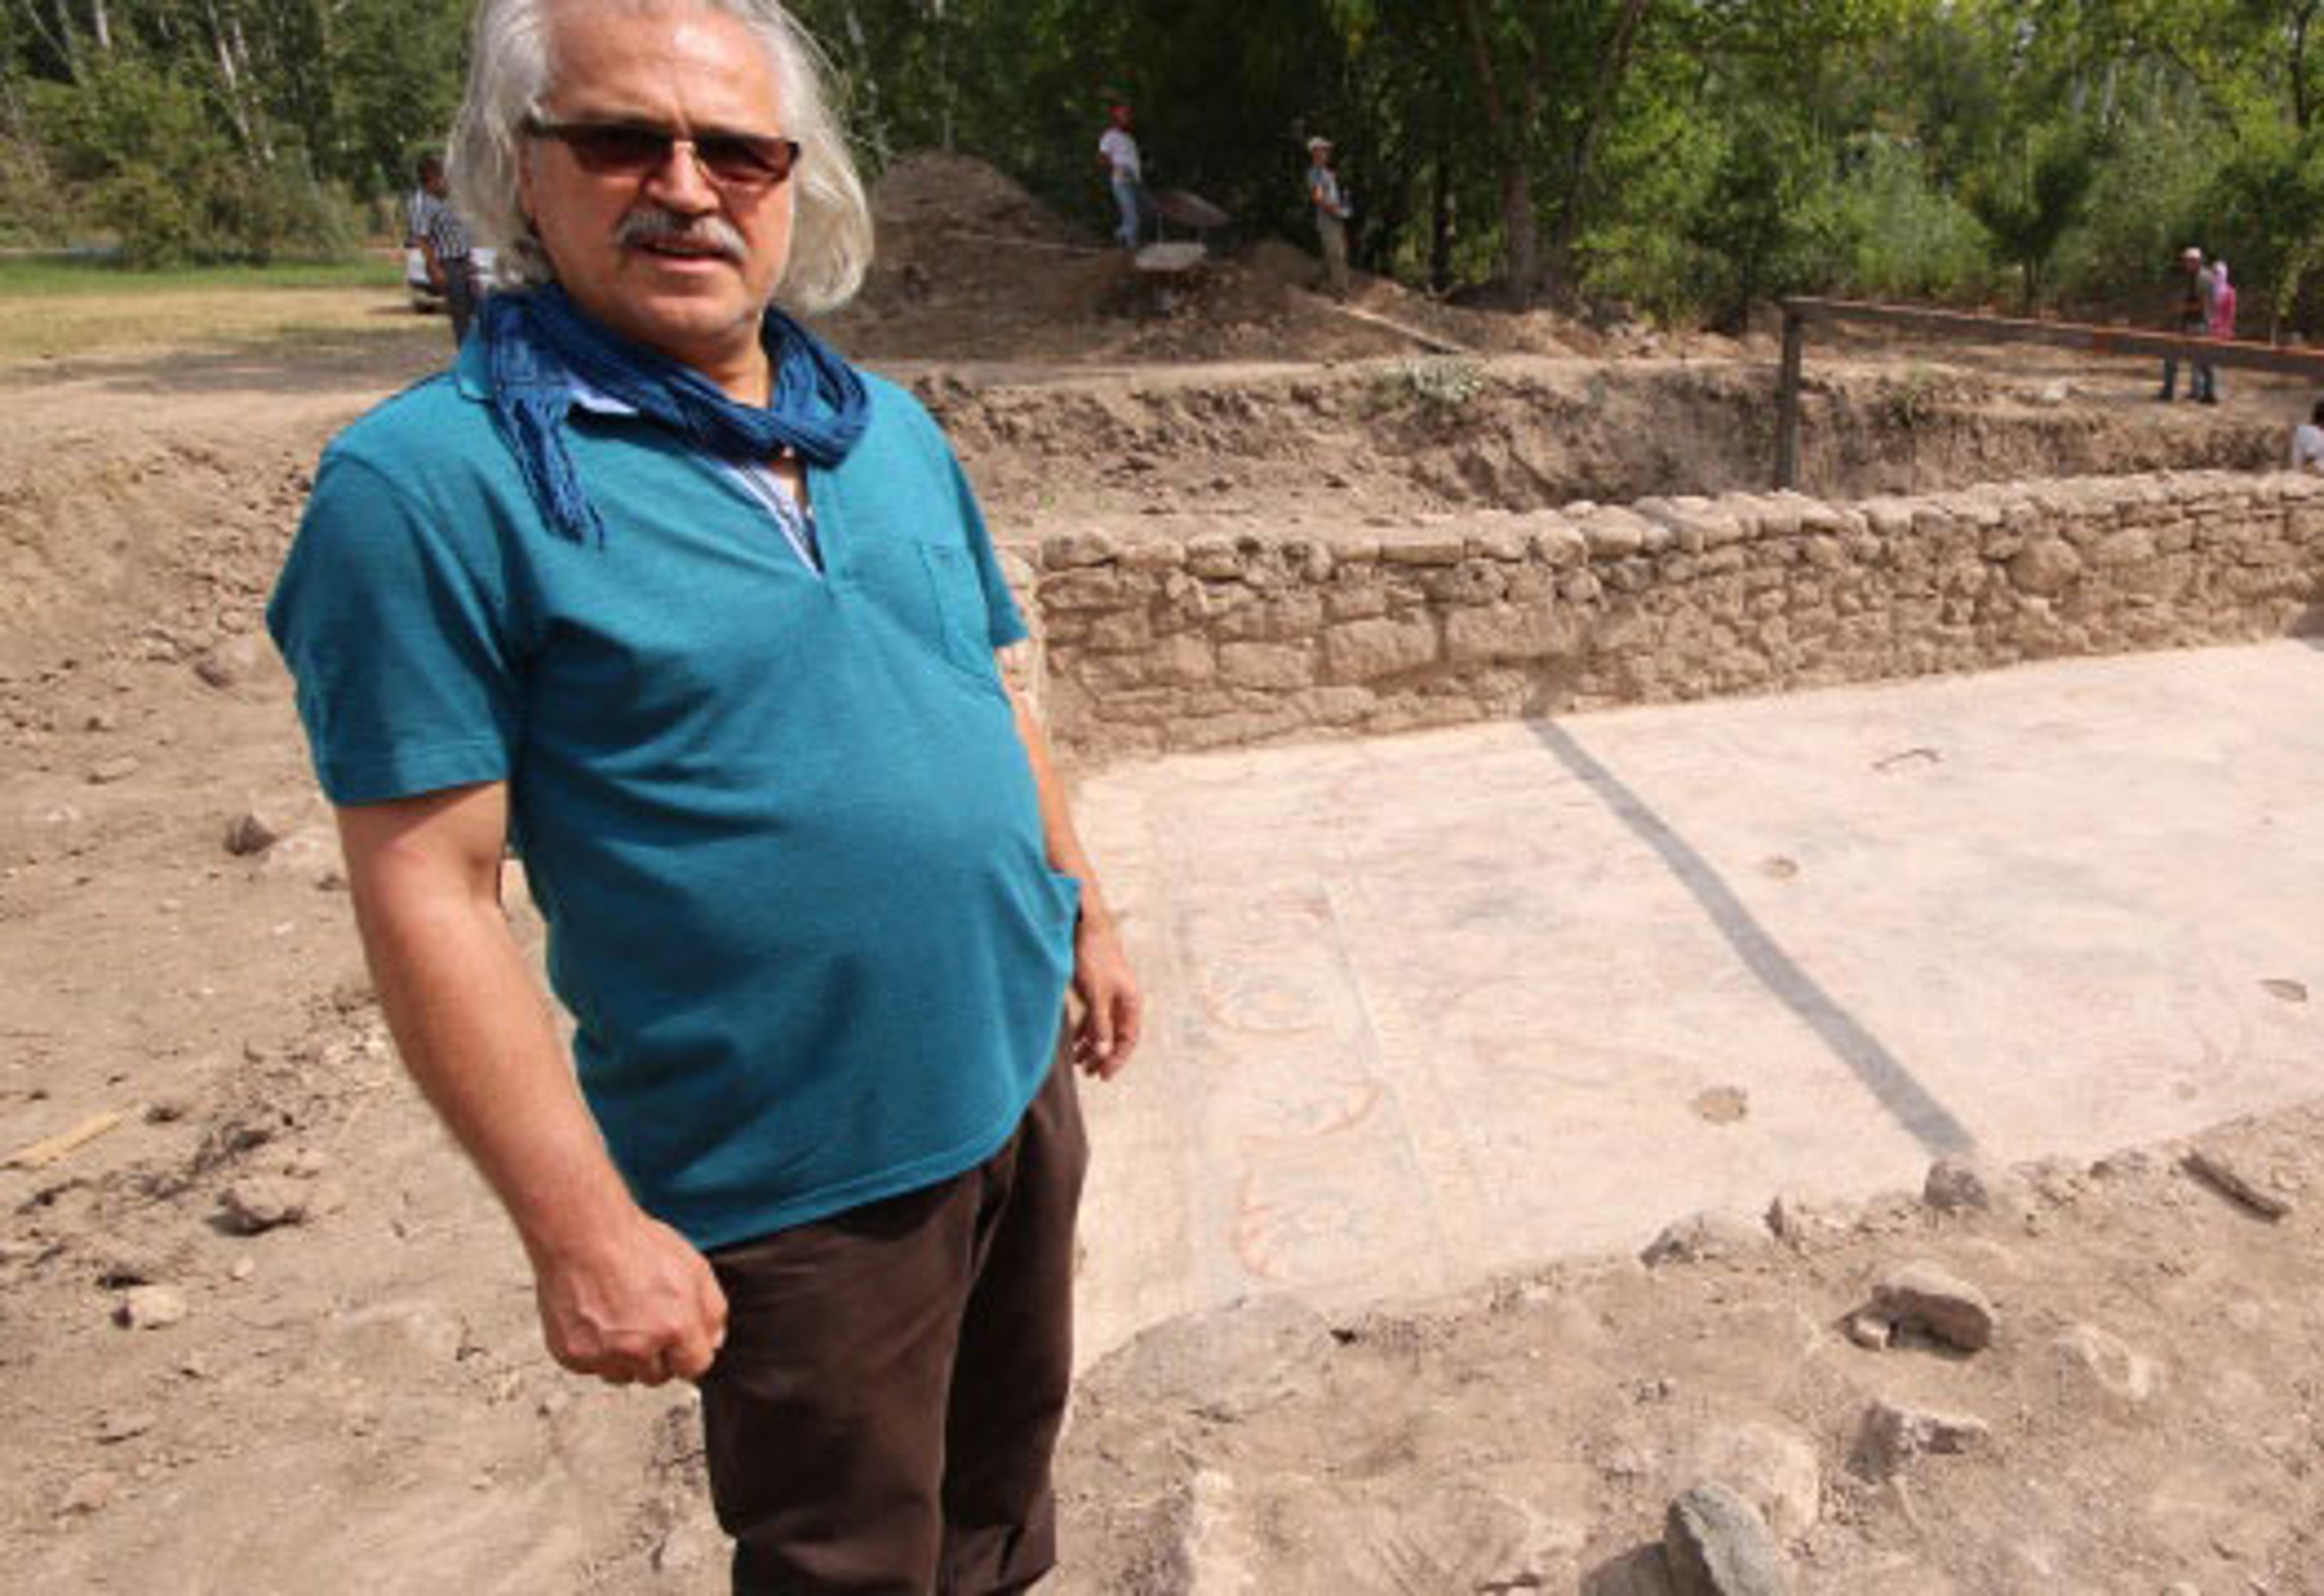 A white long-haired man in a blue shirt stands next to an archaeological dig.